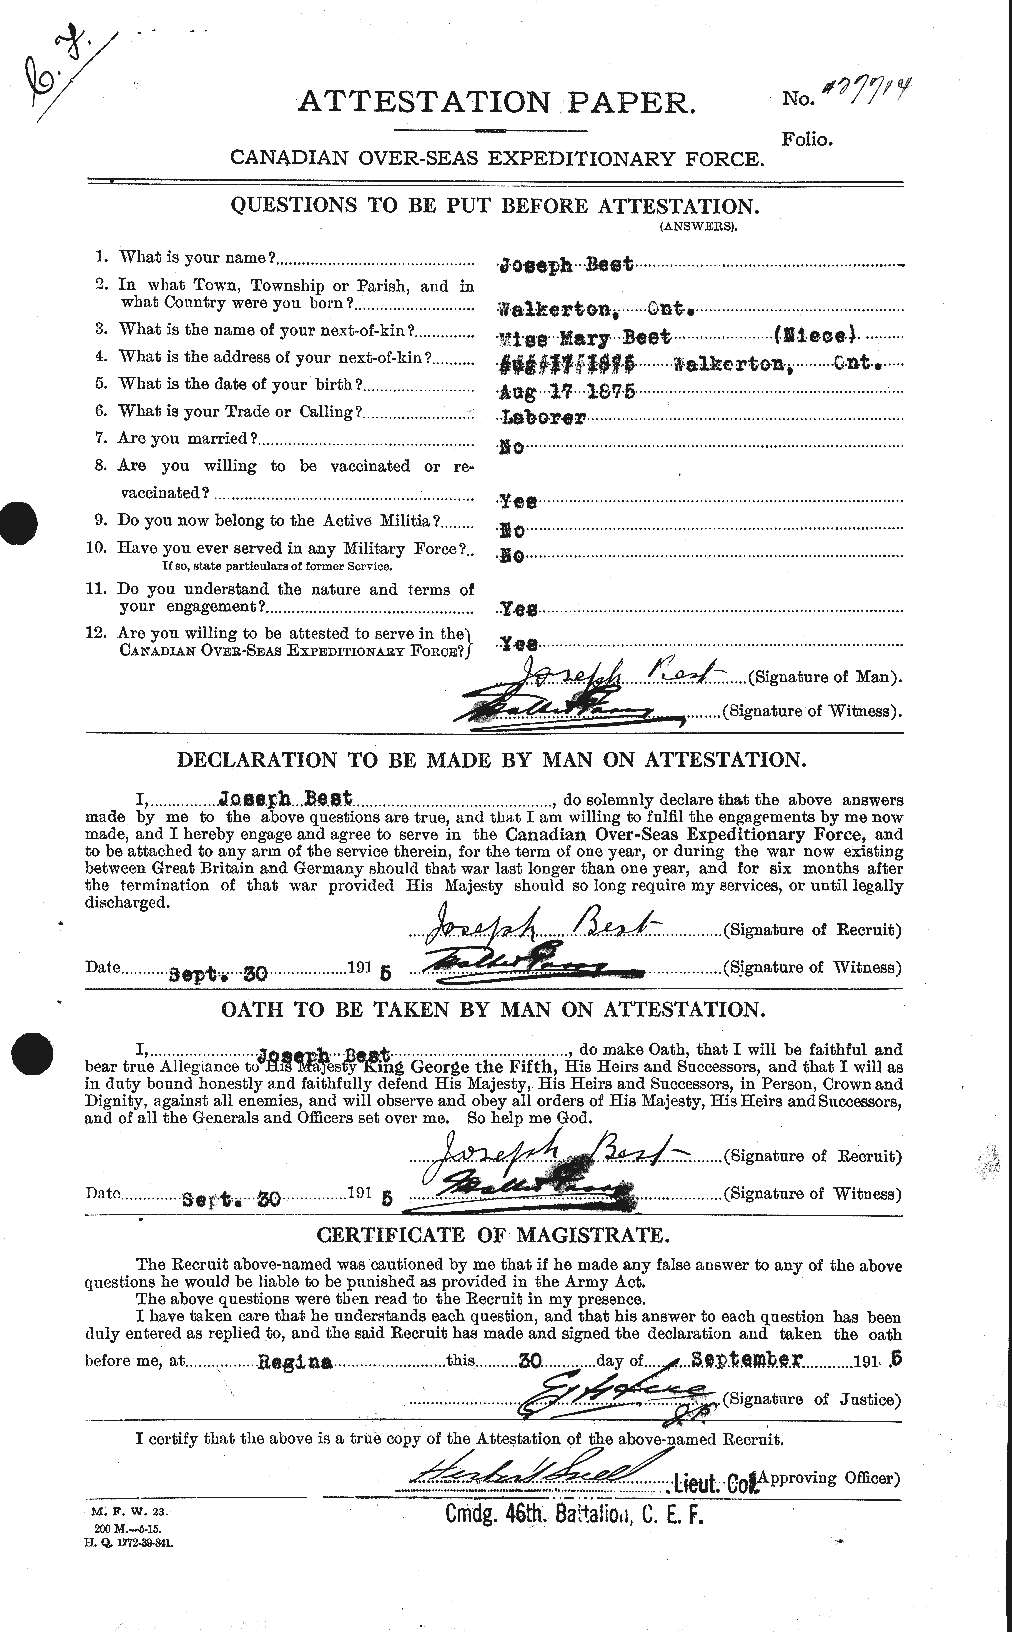 Personnel Records of the First World War - CEF 240297a